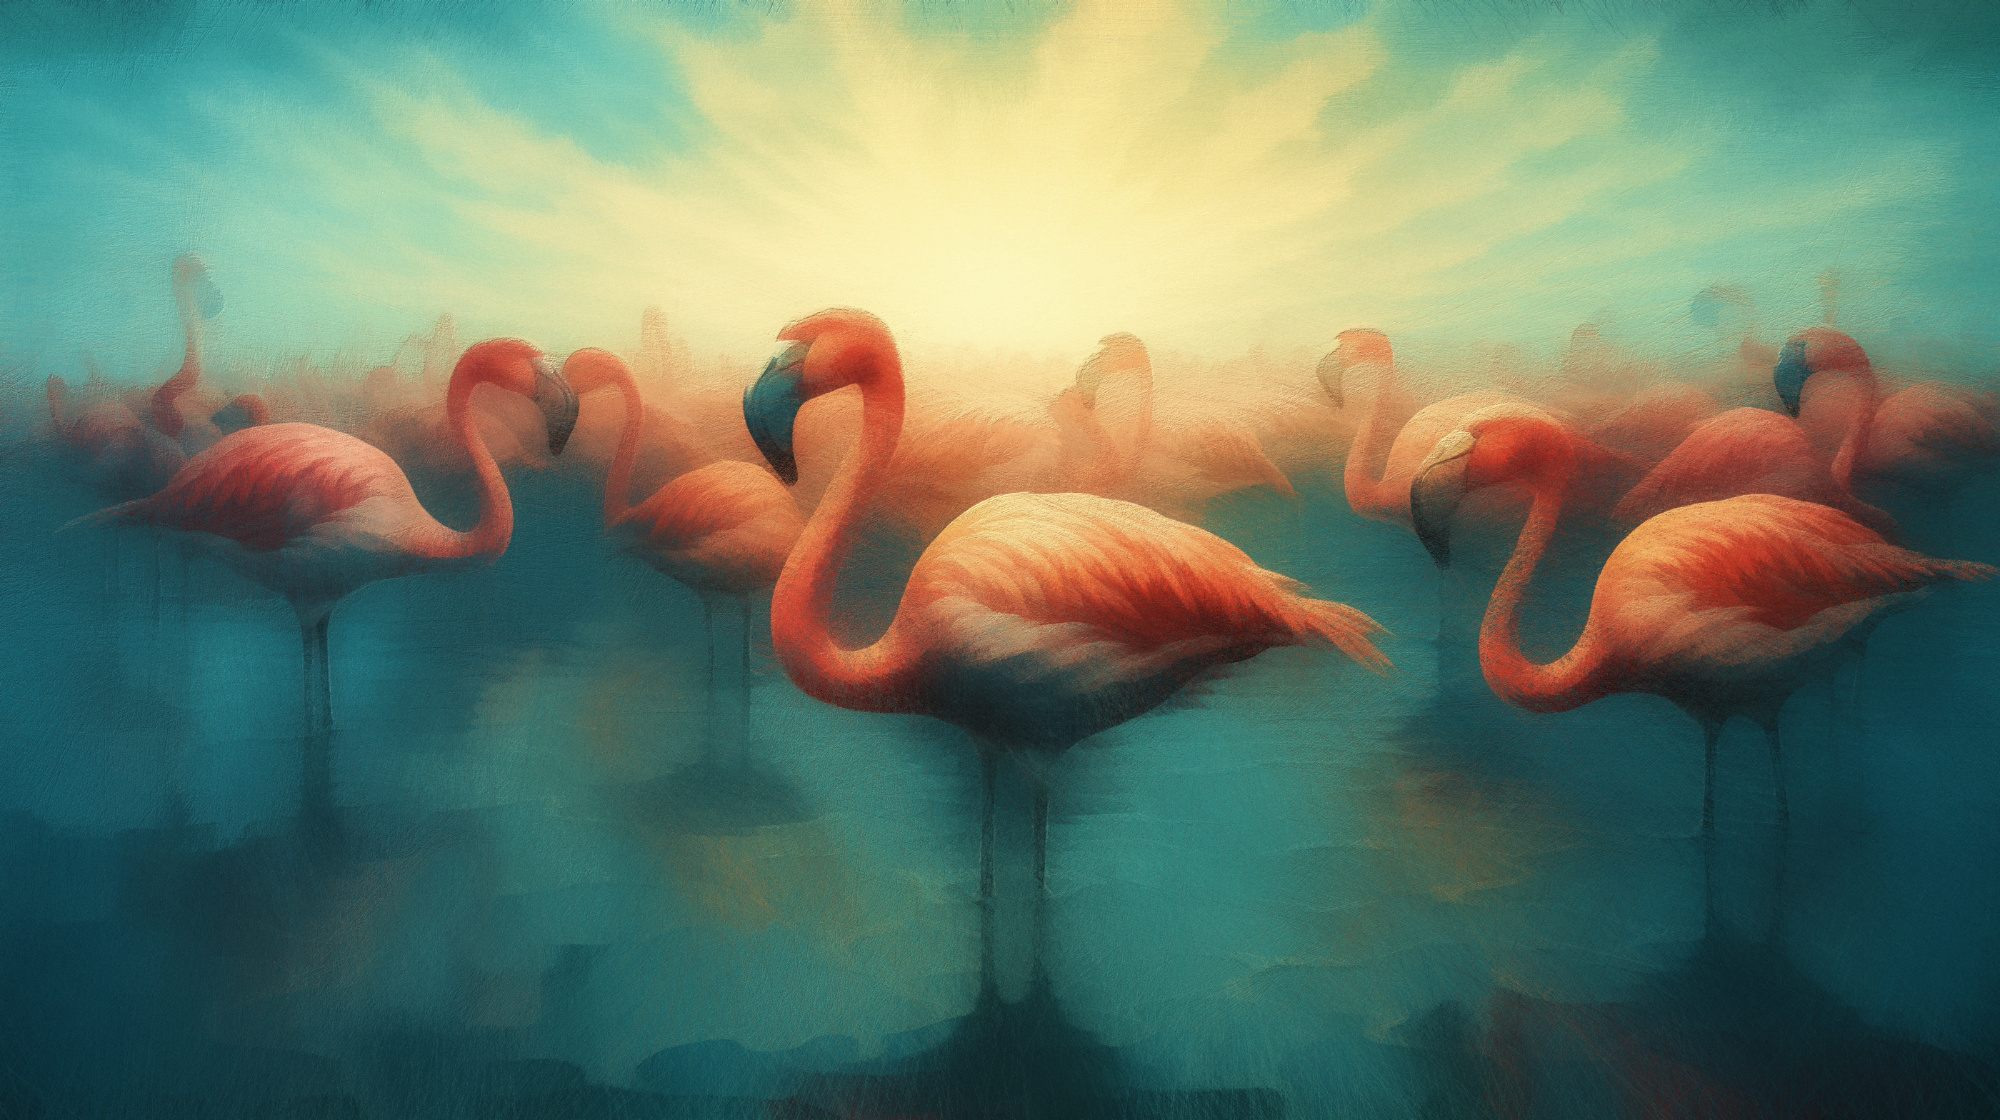 Flamingos, Water, and Sky.